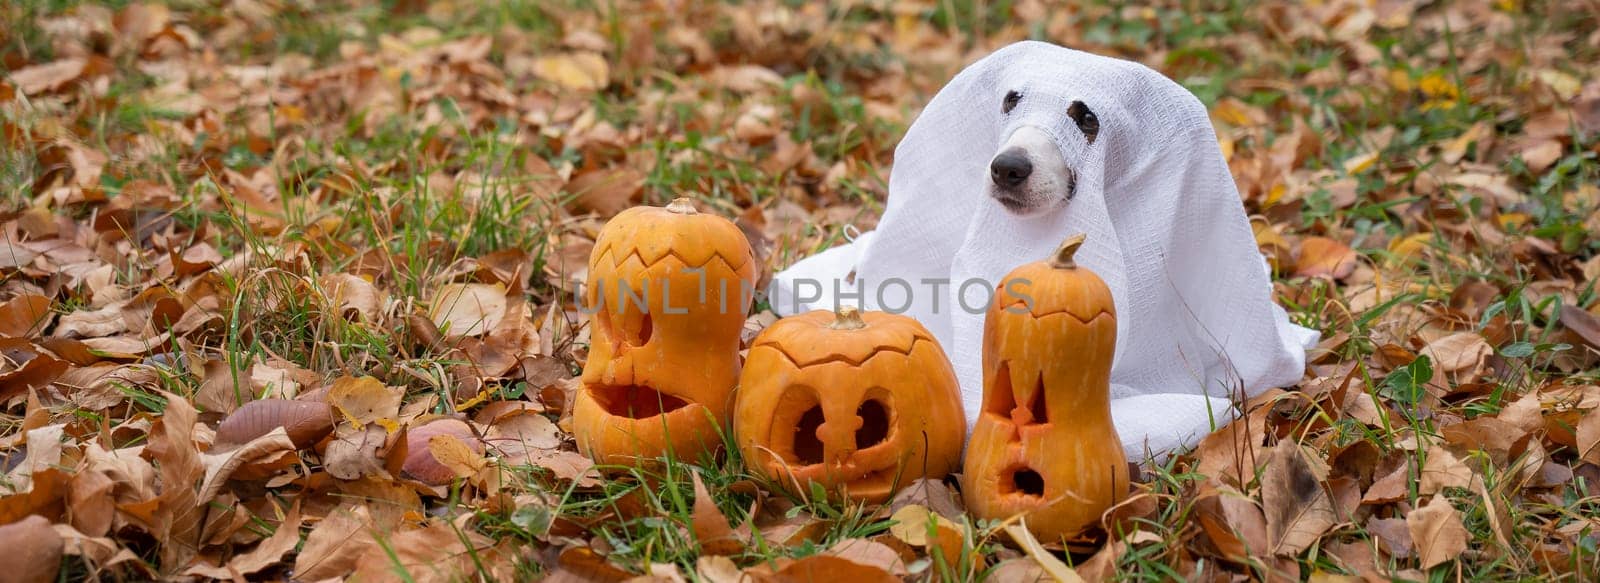 Dog jack russell terrier in a ghost costume with jack-o-lantern pumpkins in the autumn forest. by mrwed54